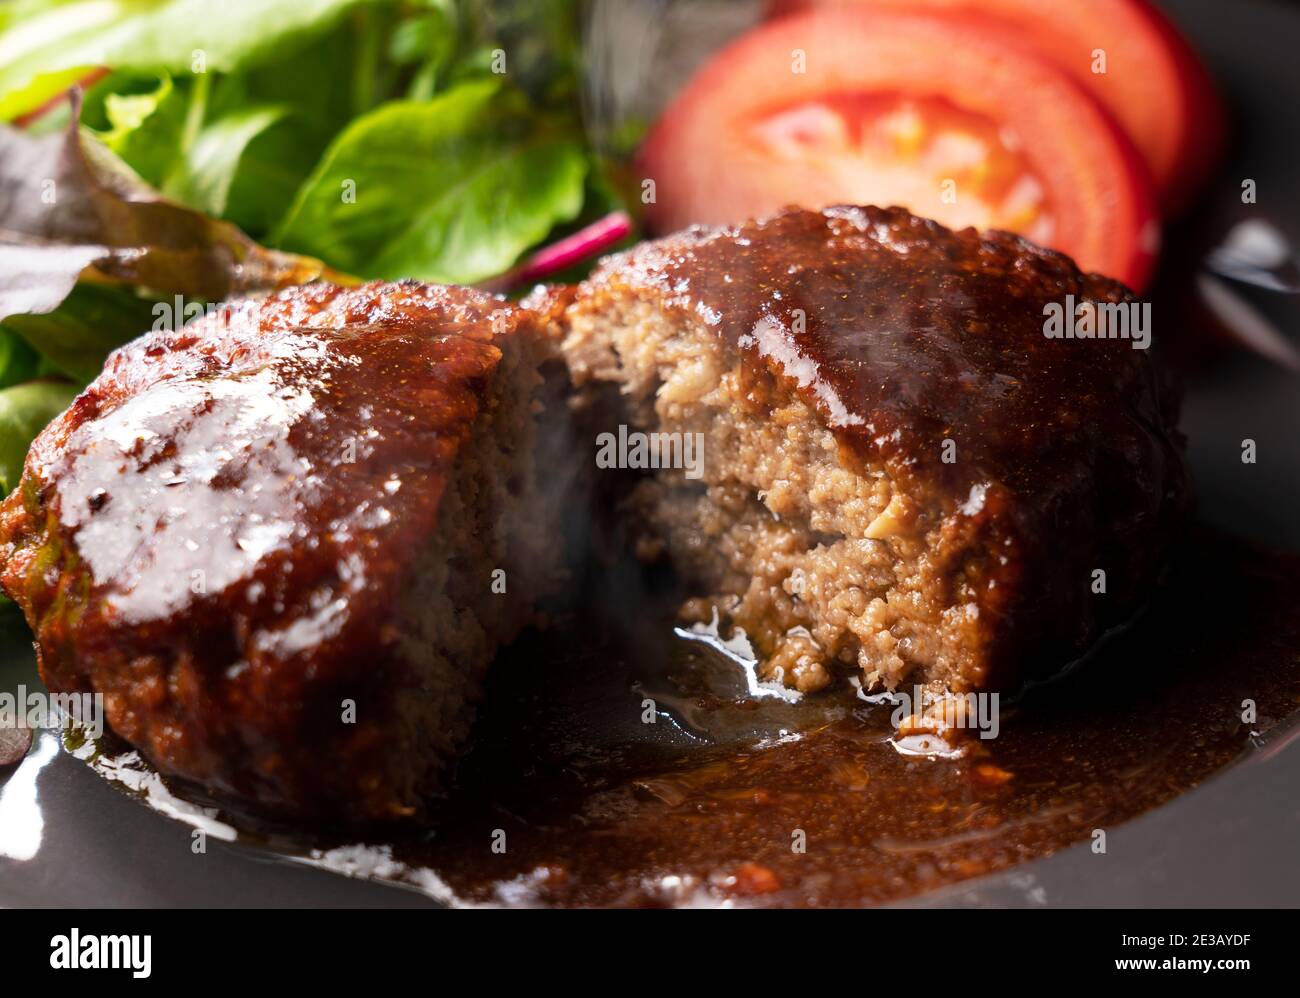 Cross section of hamburger with demi-glace sauce cut in half Stock Photo